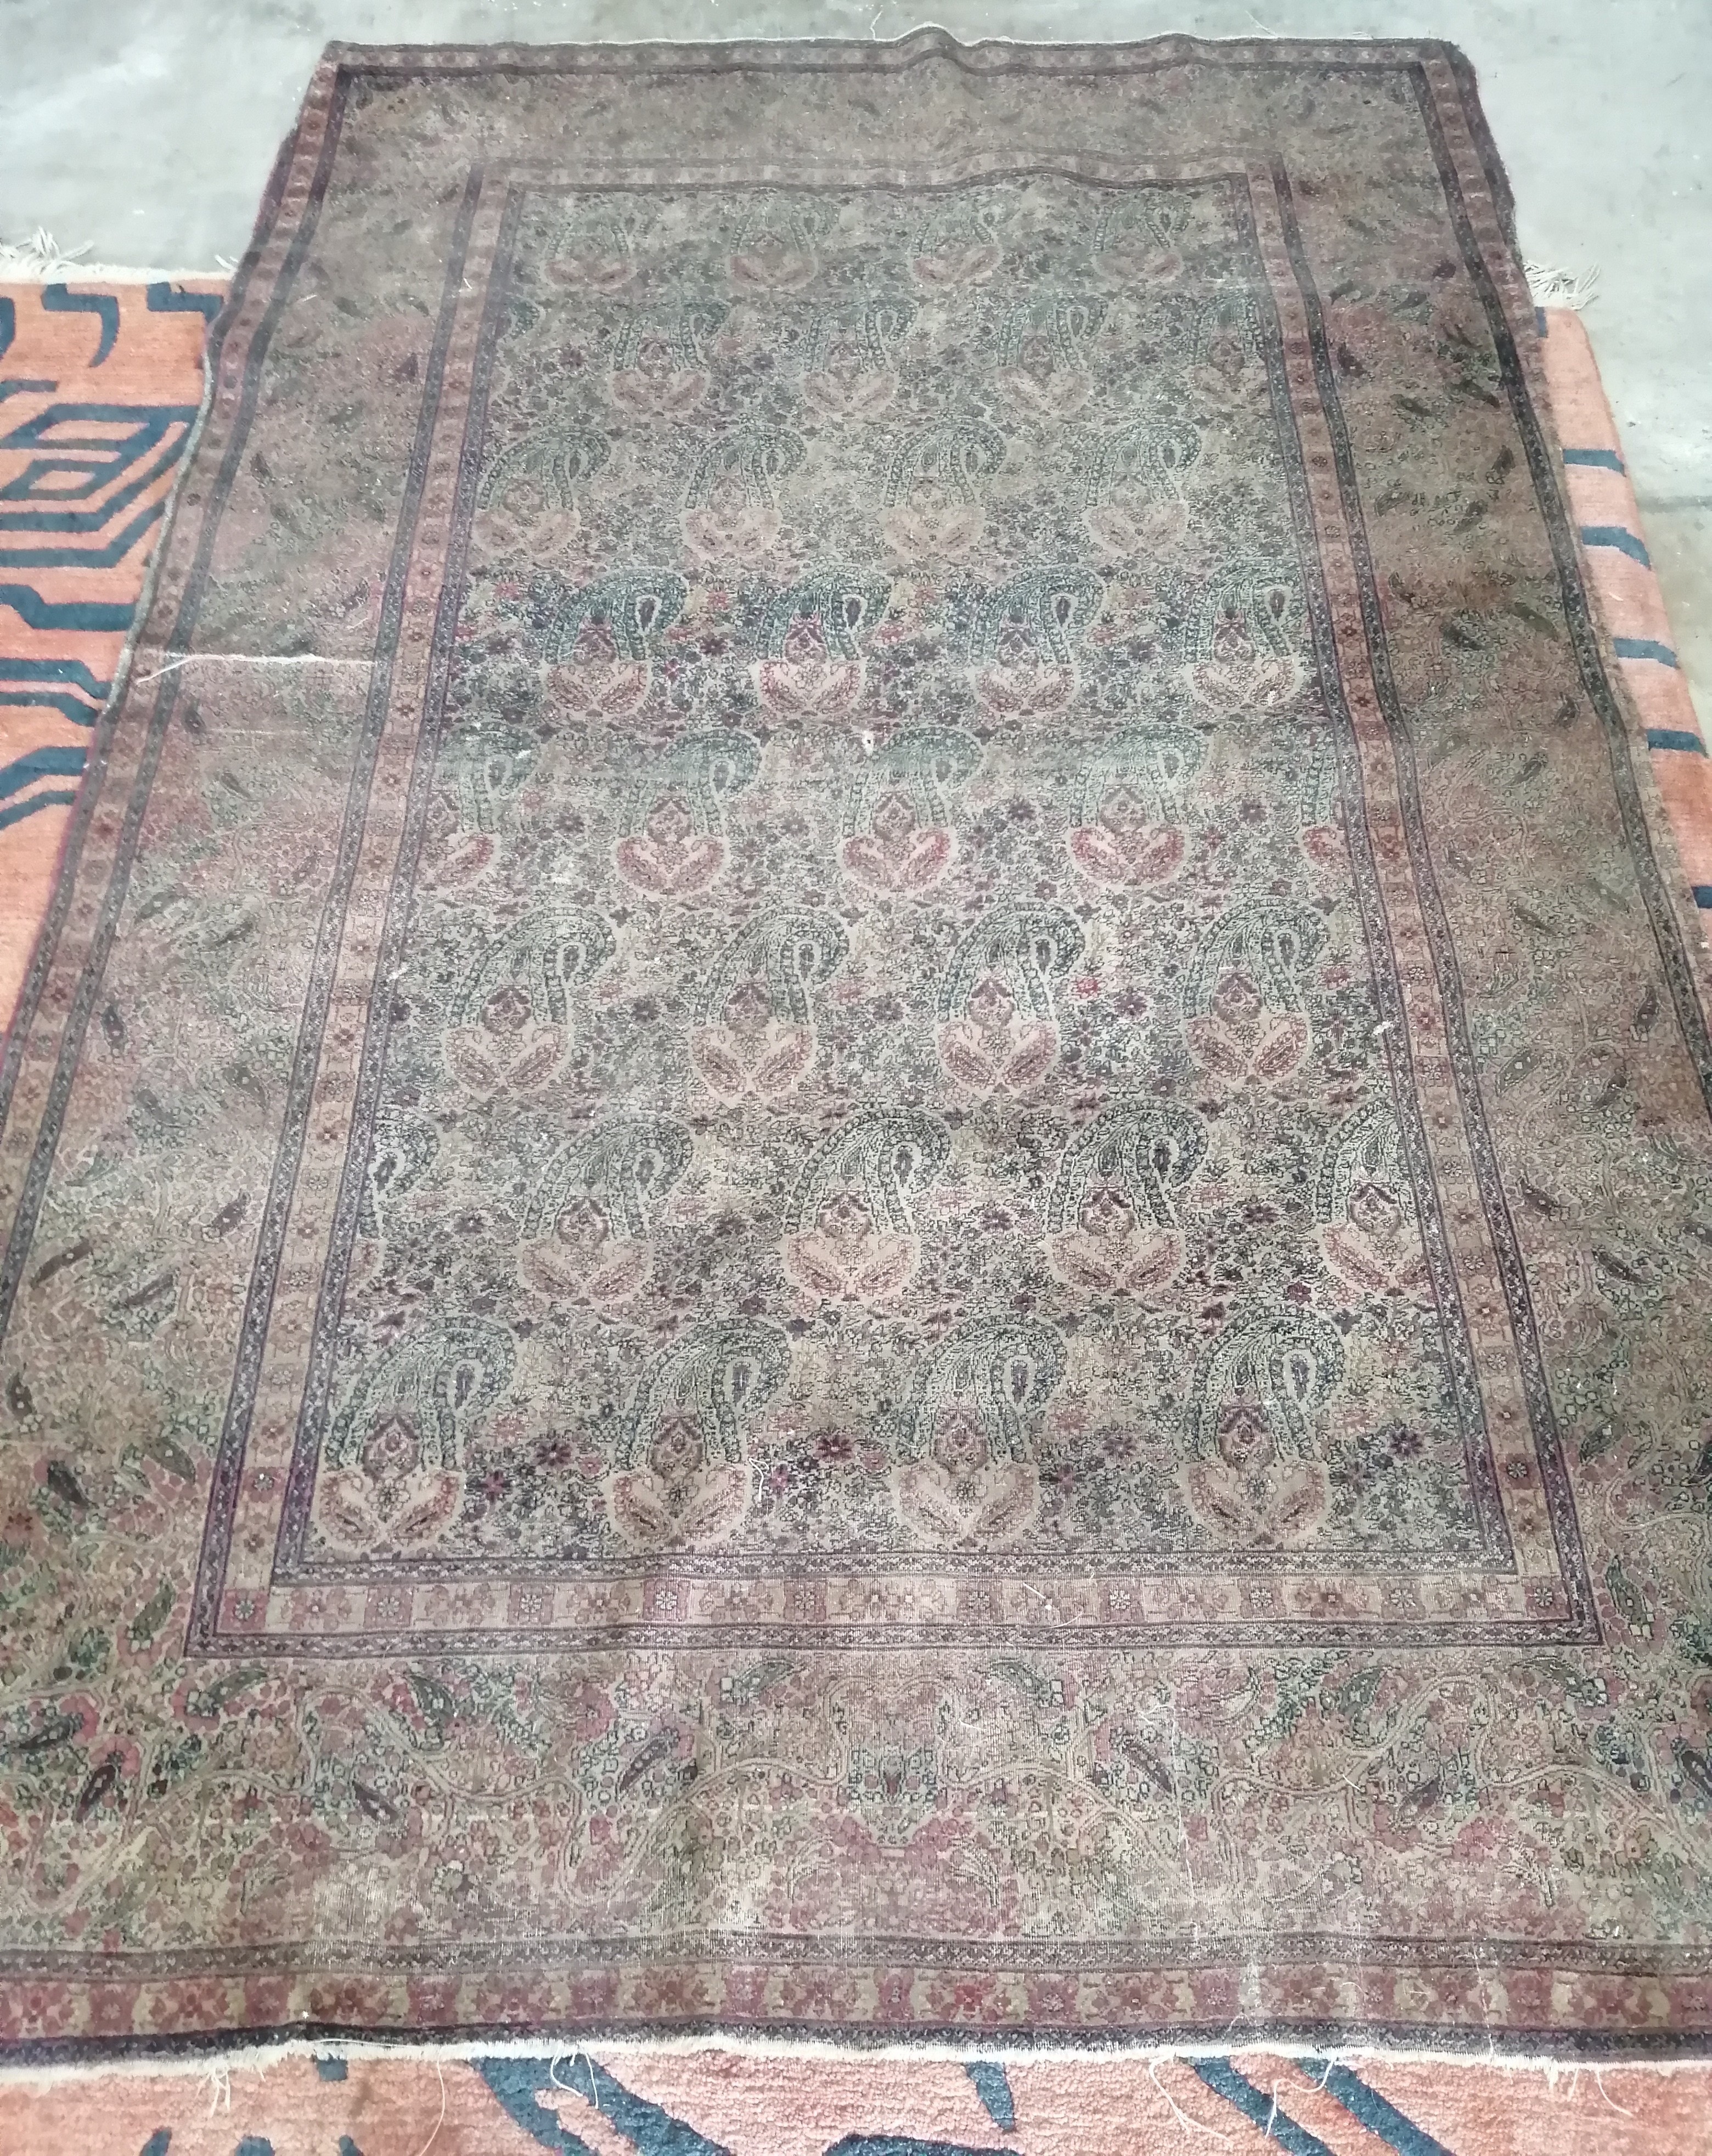 A Persian rug, woven with rows of botehs (worn), approx. 200 x 140cm